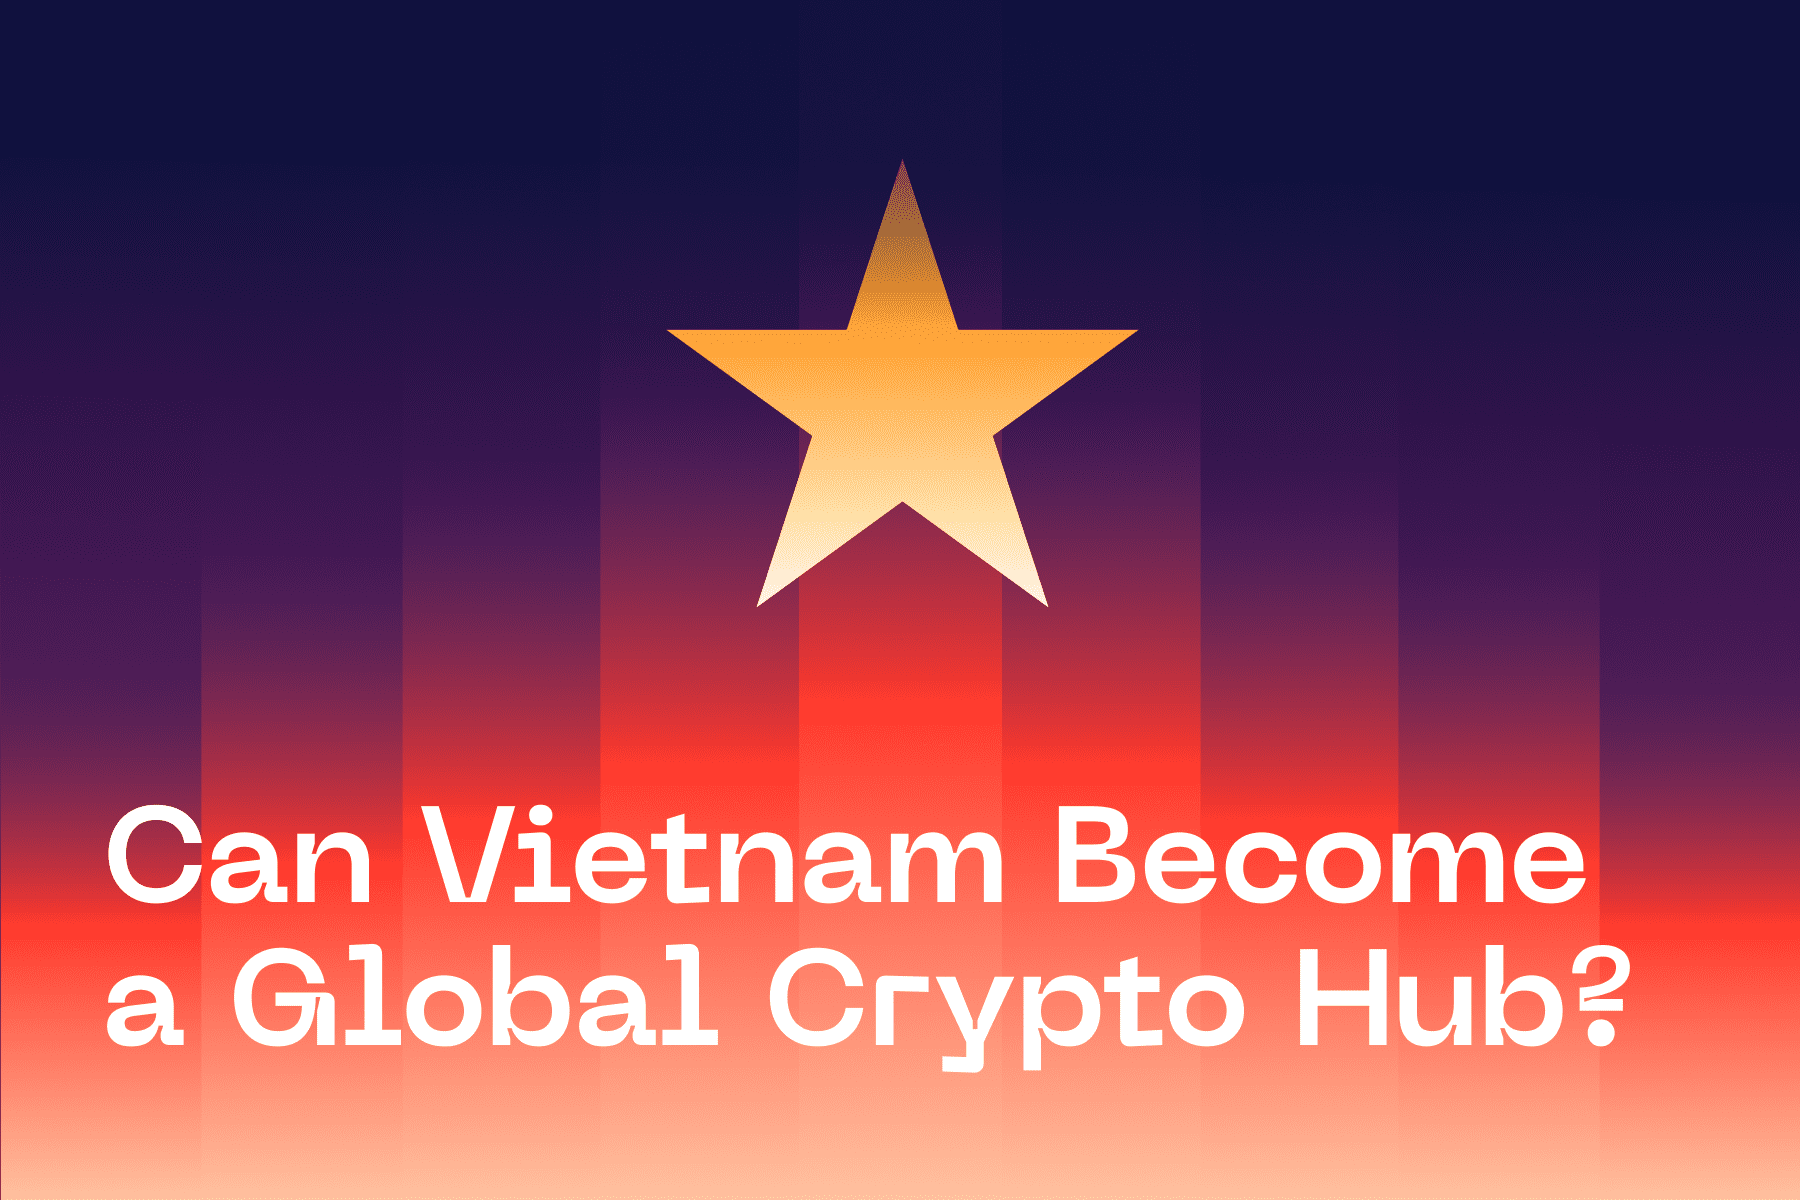 Can Vietnam Become a Global Crypto Hub?